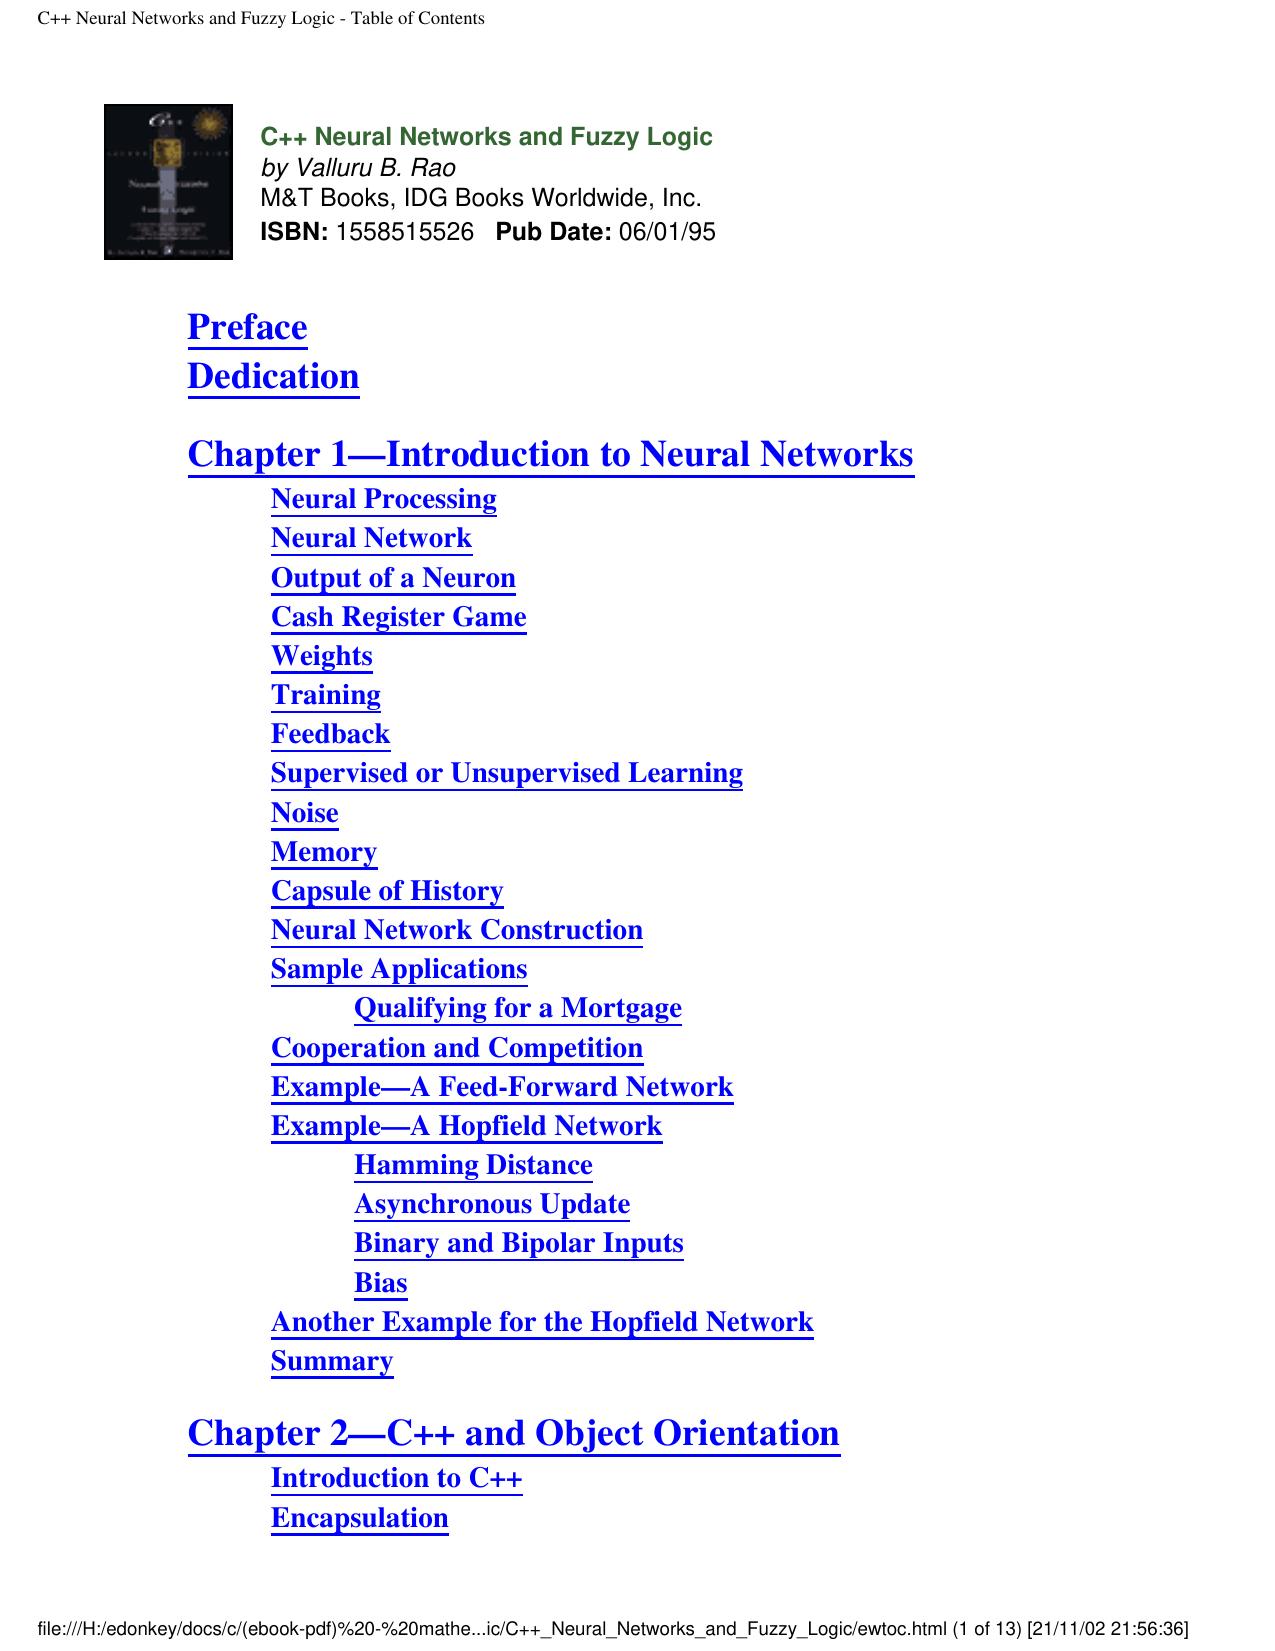 C++ Neural Networks and Fuzzy Logic - Table of Contents